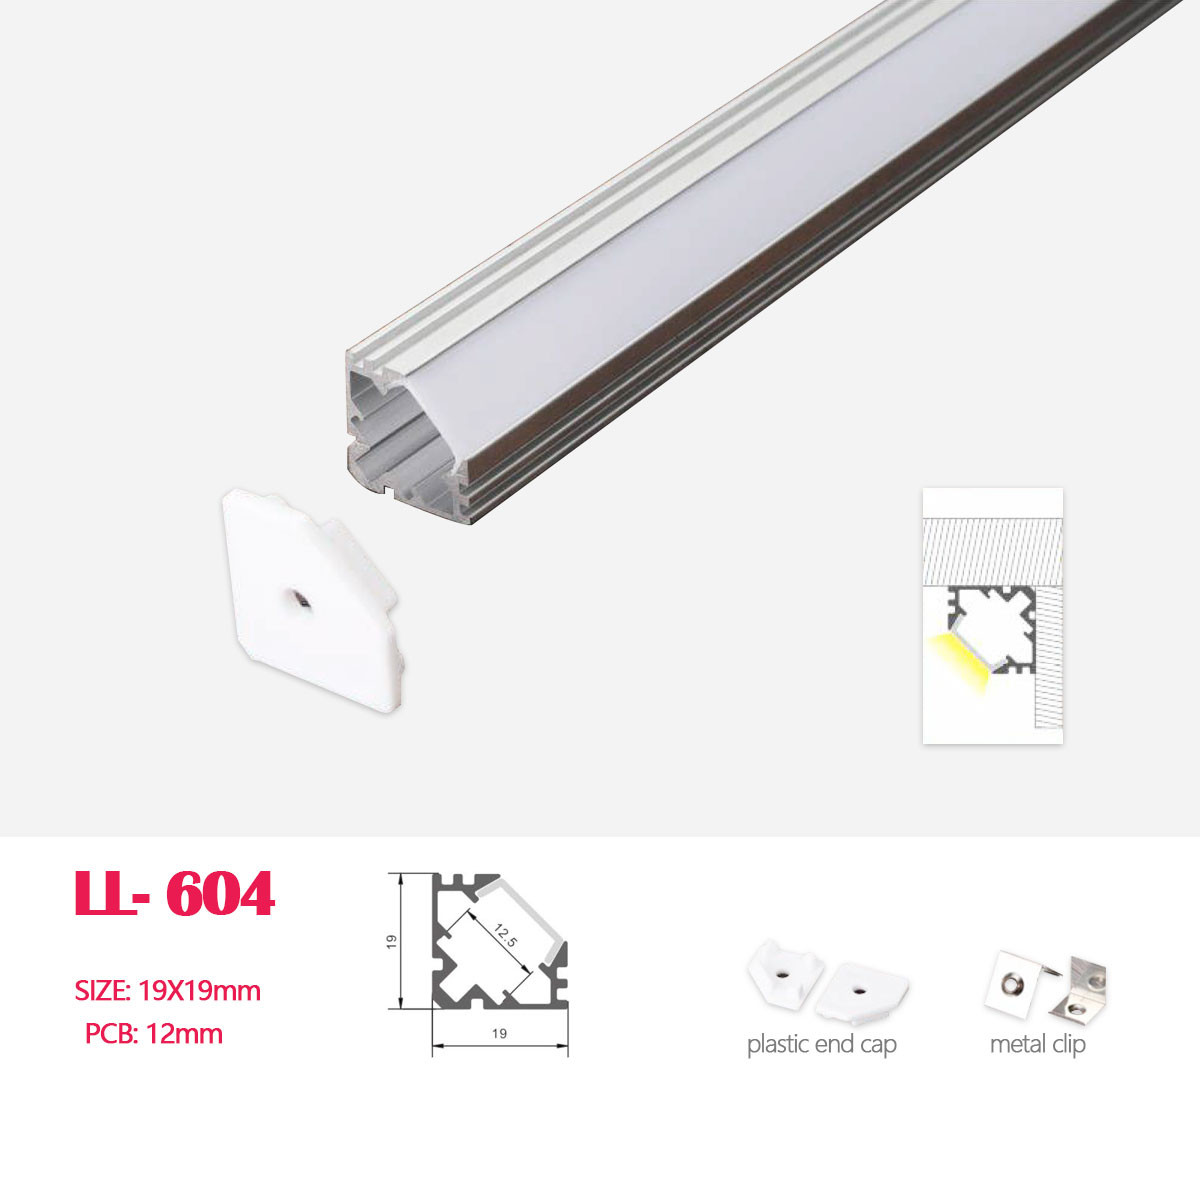  1M (3.28FT) 19MM*19MM V-slot LED Aluminum Profile with  Small Flat Cover,with End Caps and Mounting Clips for Corner Mounted /  Joint LED Strip Lighting